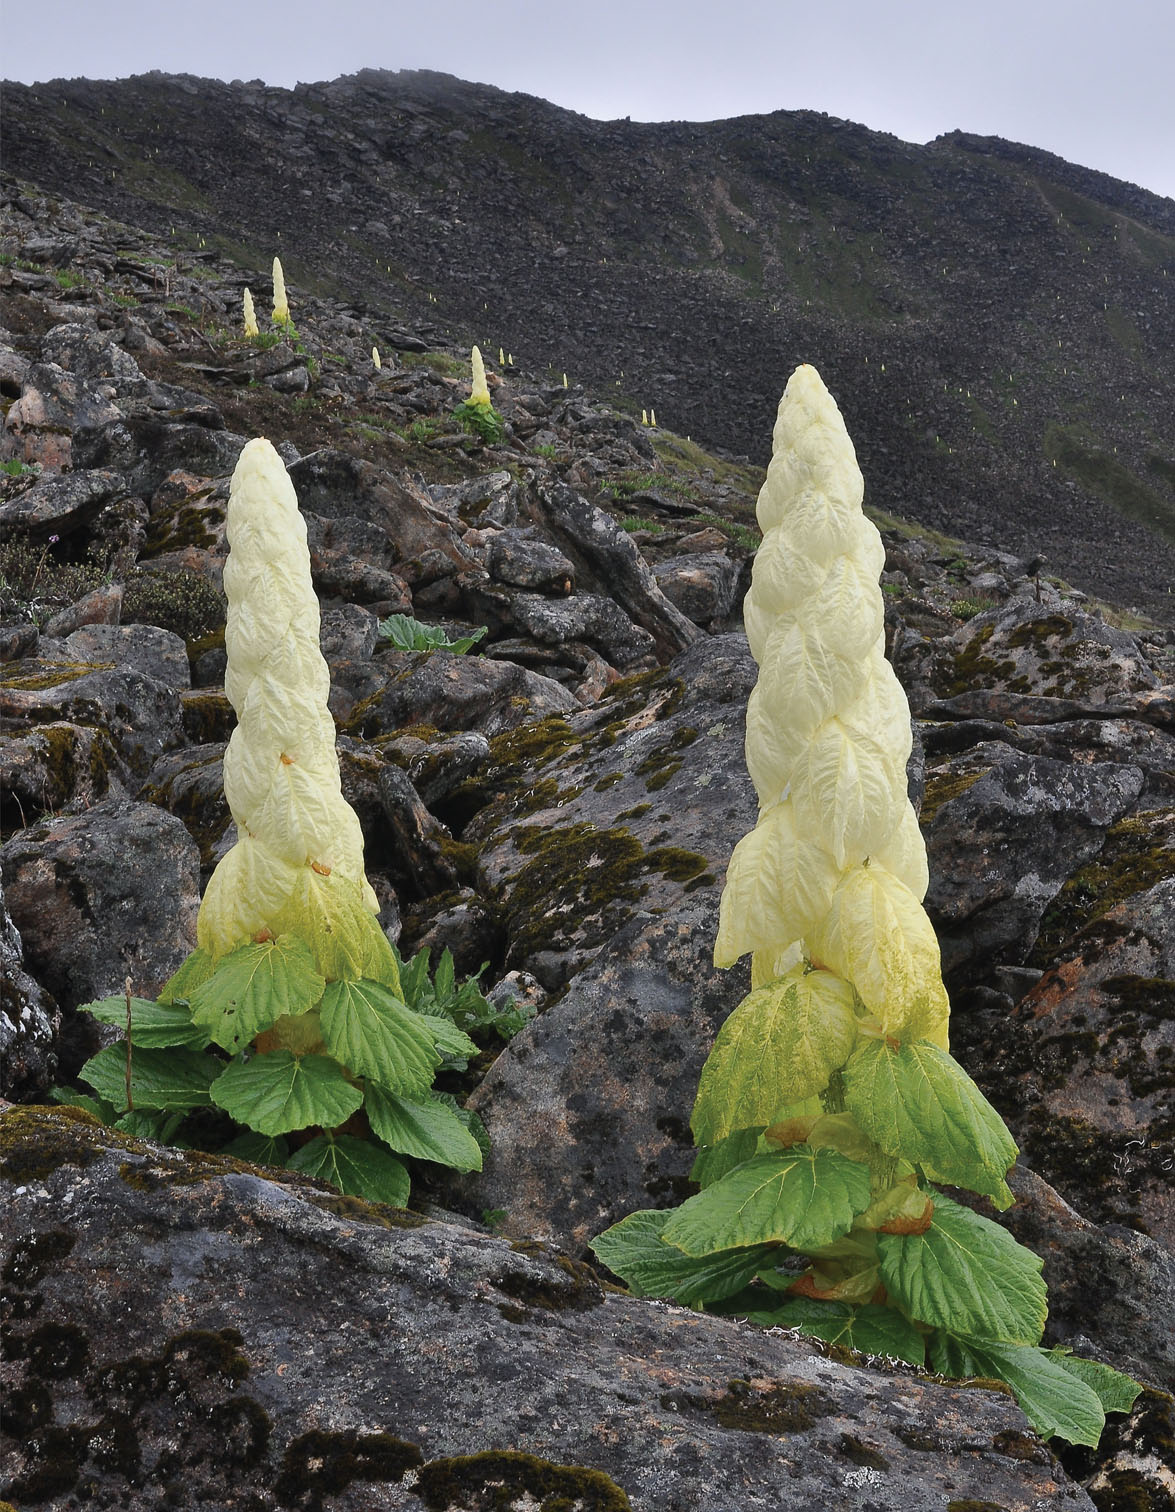 111. The Himalayan rhubarb (Rheum nobile) – probably the closest biology comes to a greenhouse. The adaptation has given the plant a substantial advantage over others in the same habitat